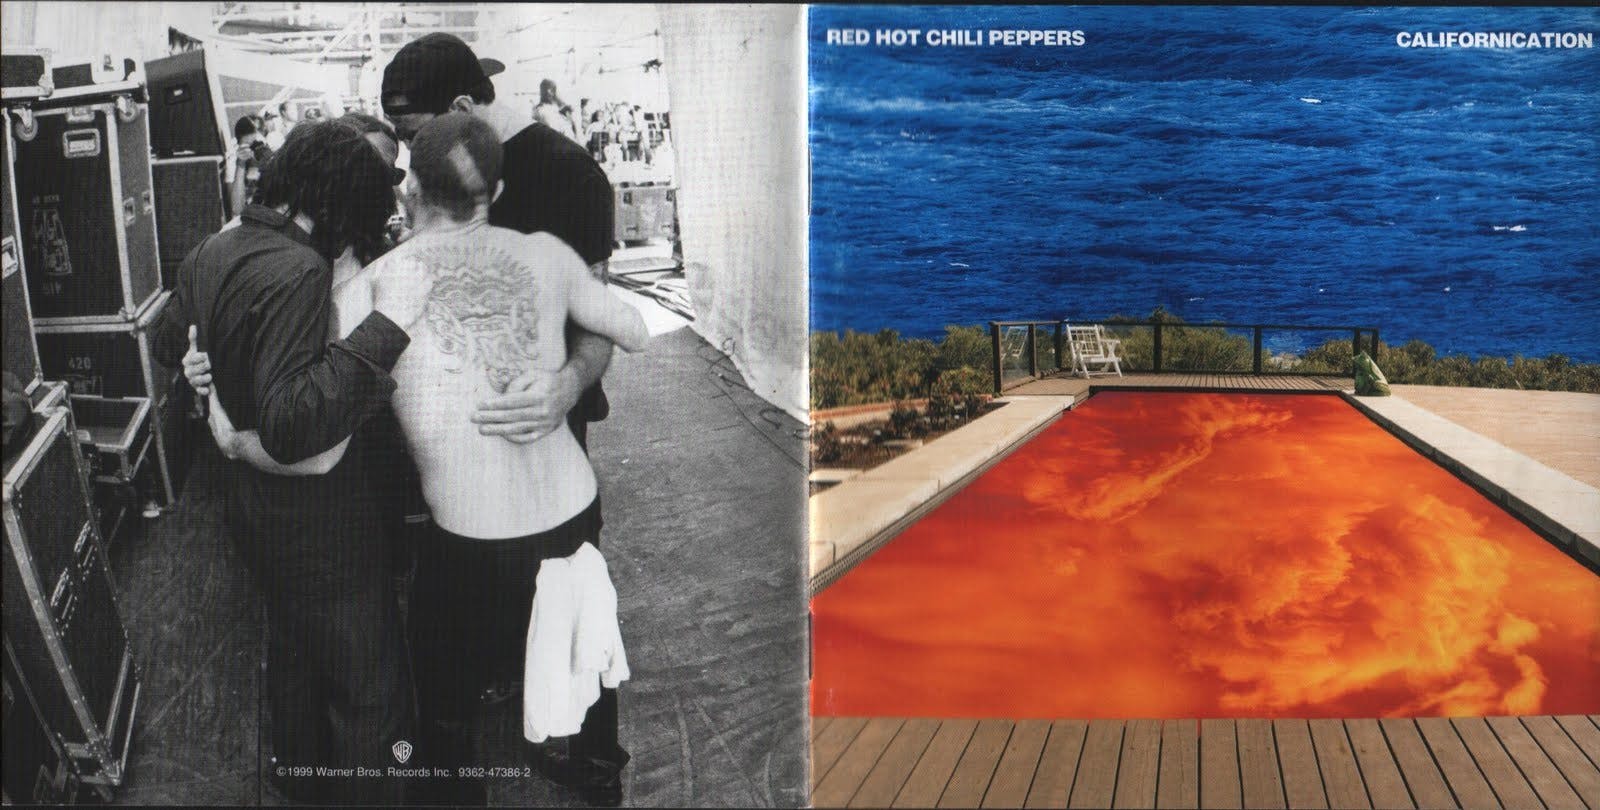 You Can Make Fun of the Red Hot Chili Peppers All You Want, But Californication Is A Perfect Record